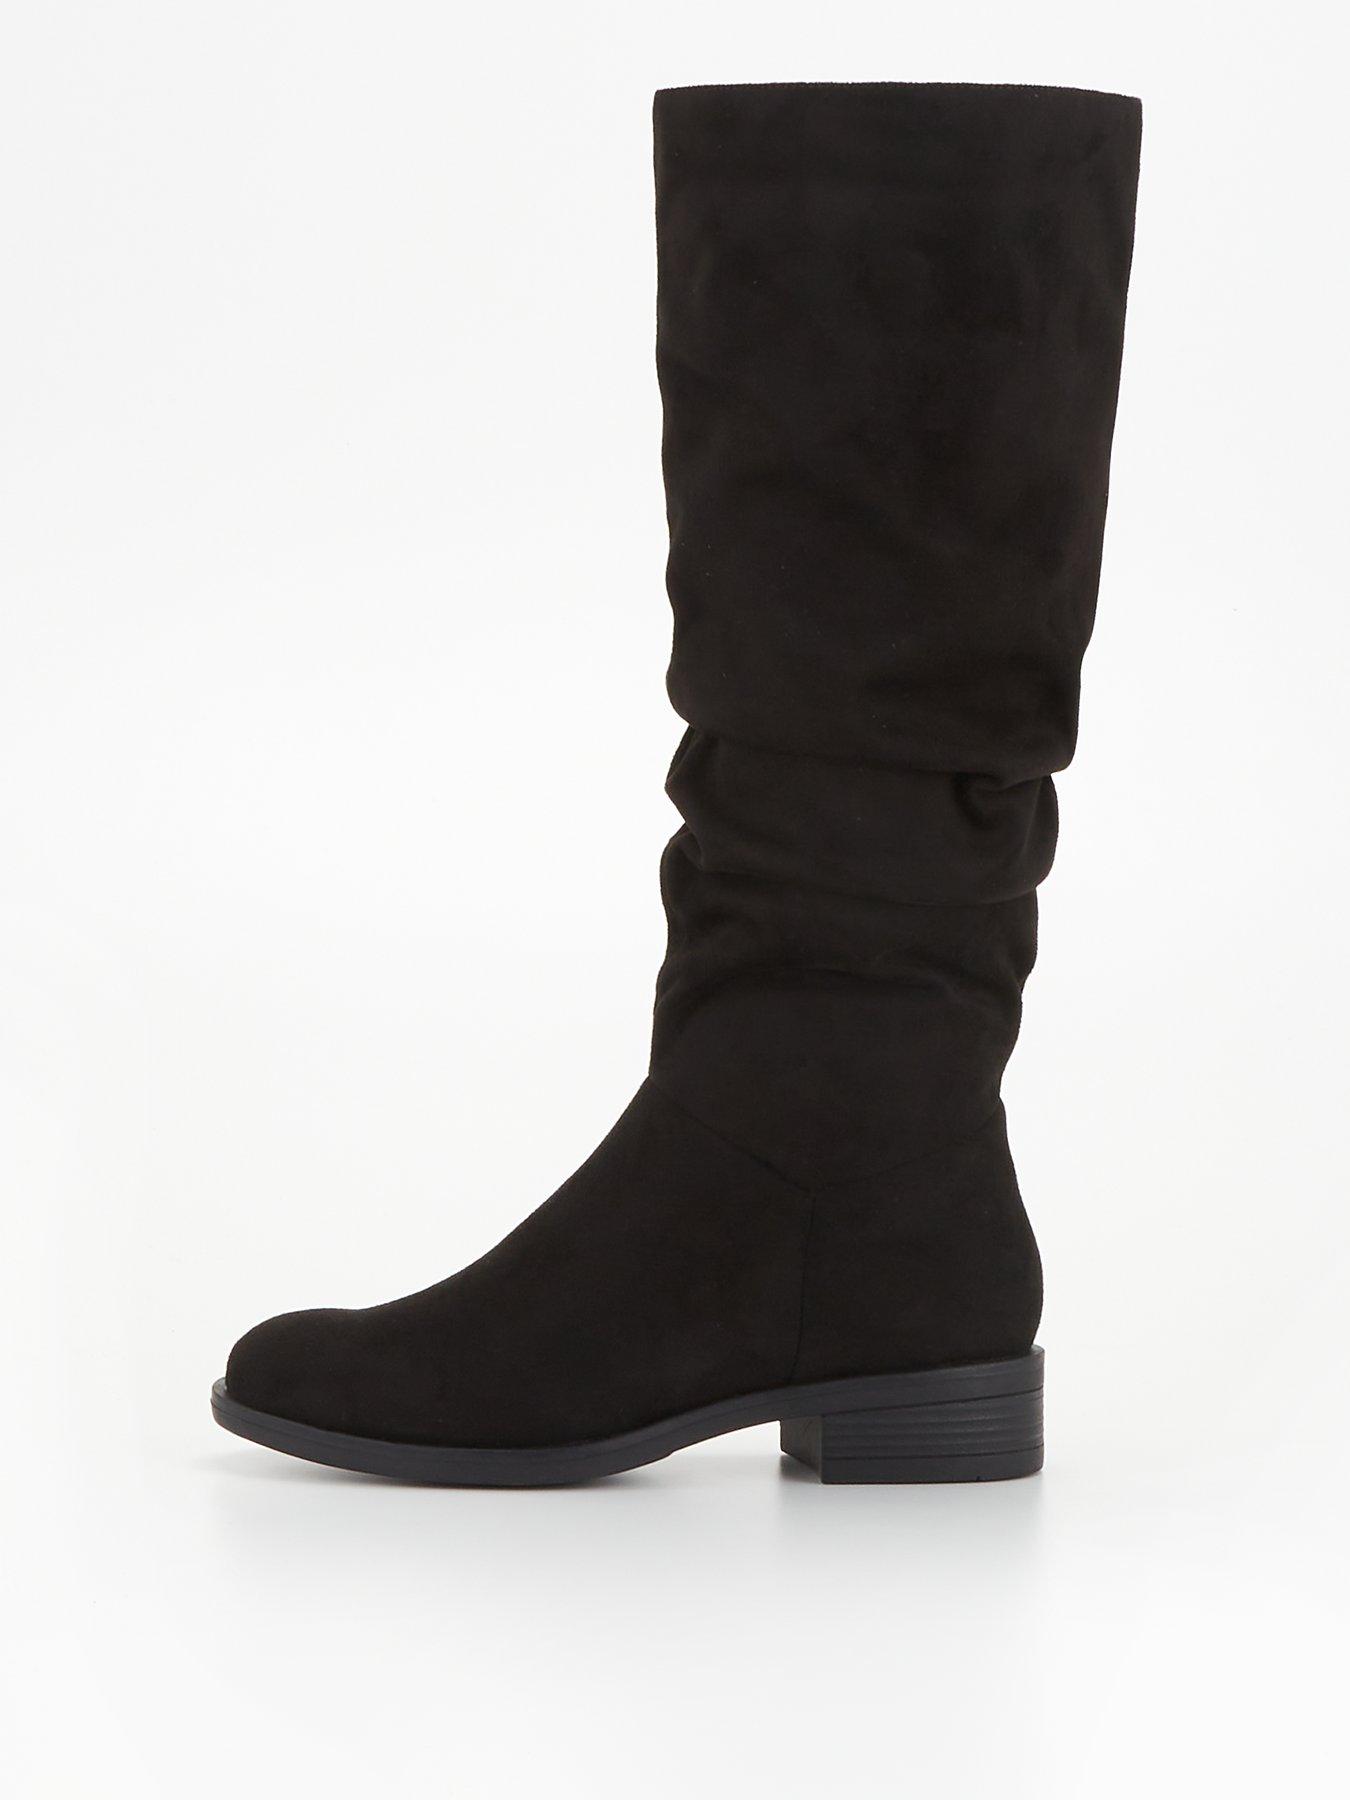 Everyday Comfort Slouch Knee Boot with Wider Fitting Calf - Black ...